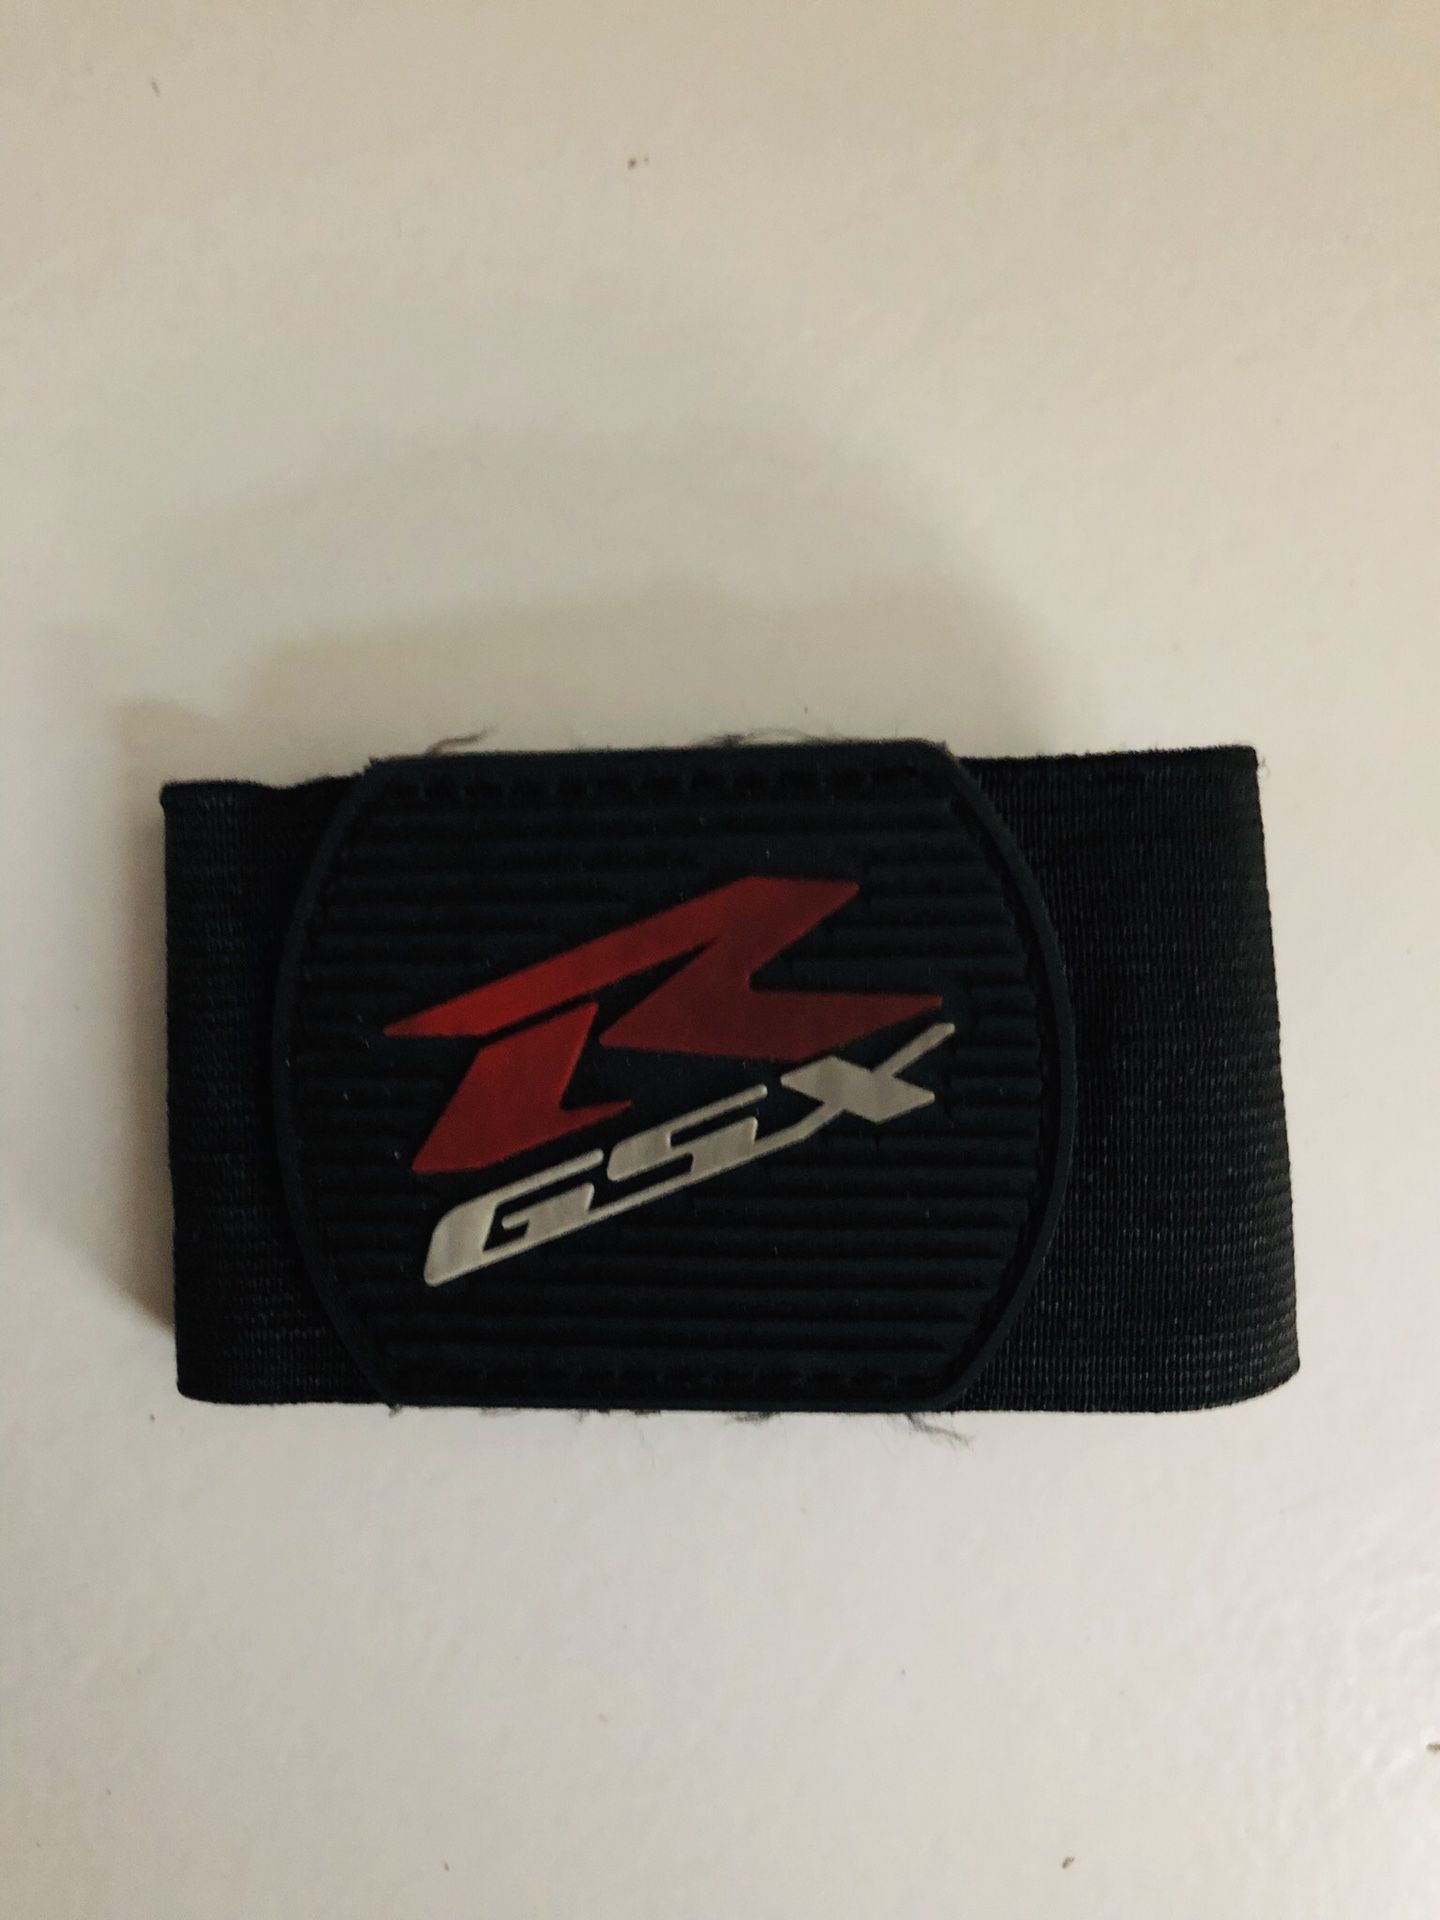 Gsxr motorcycle gear shift boot cover